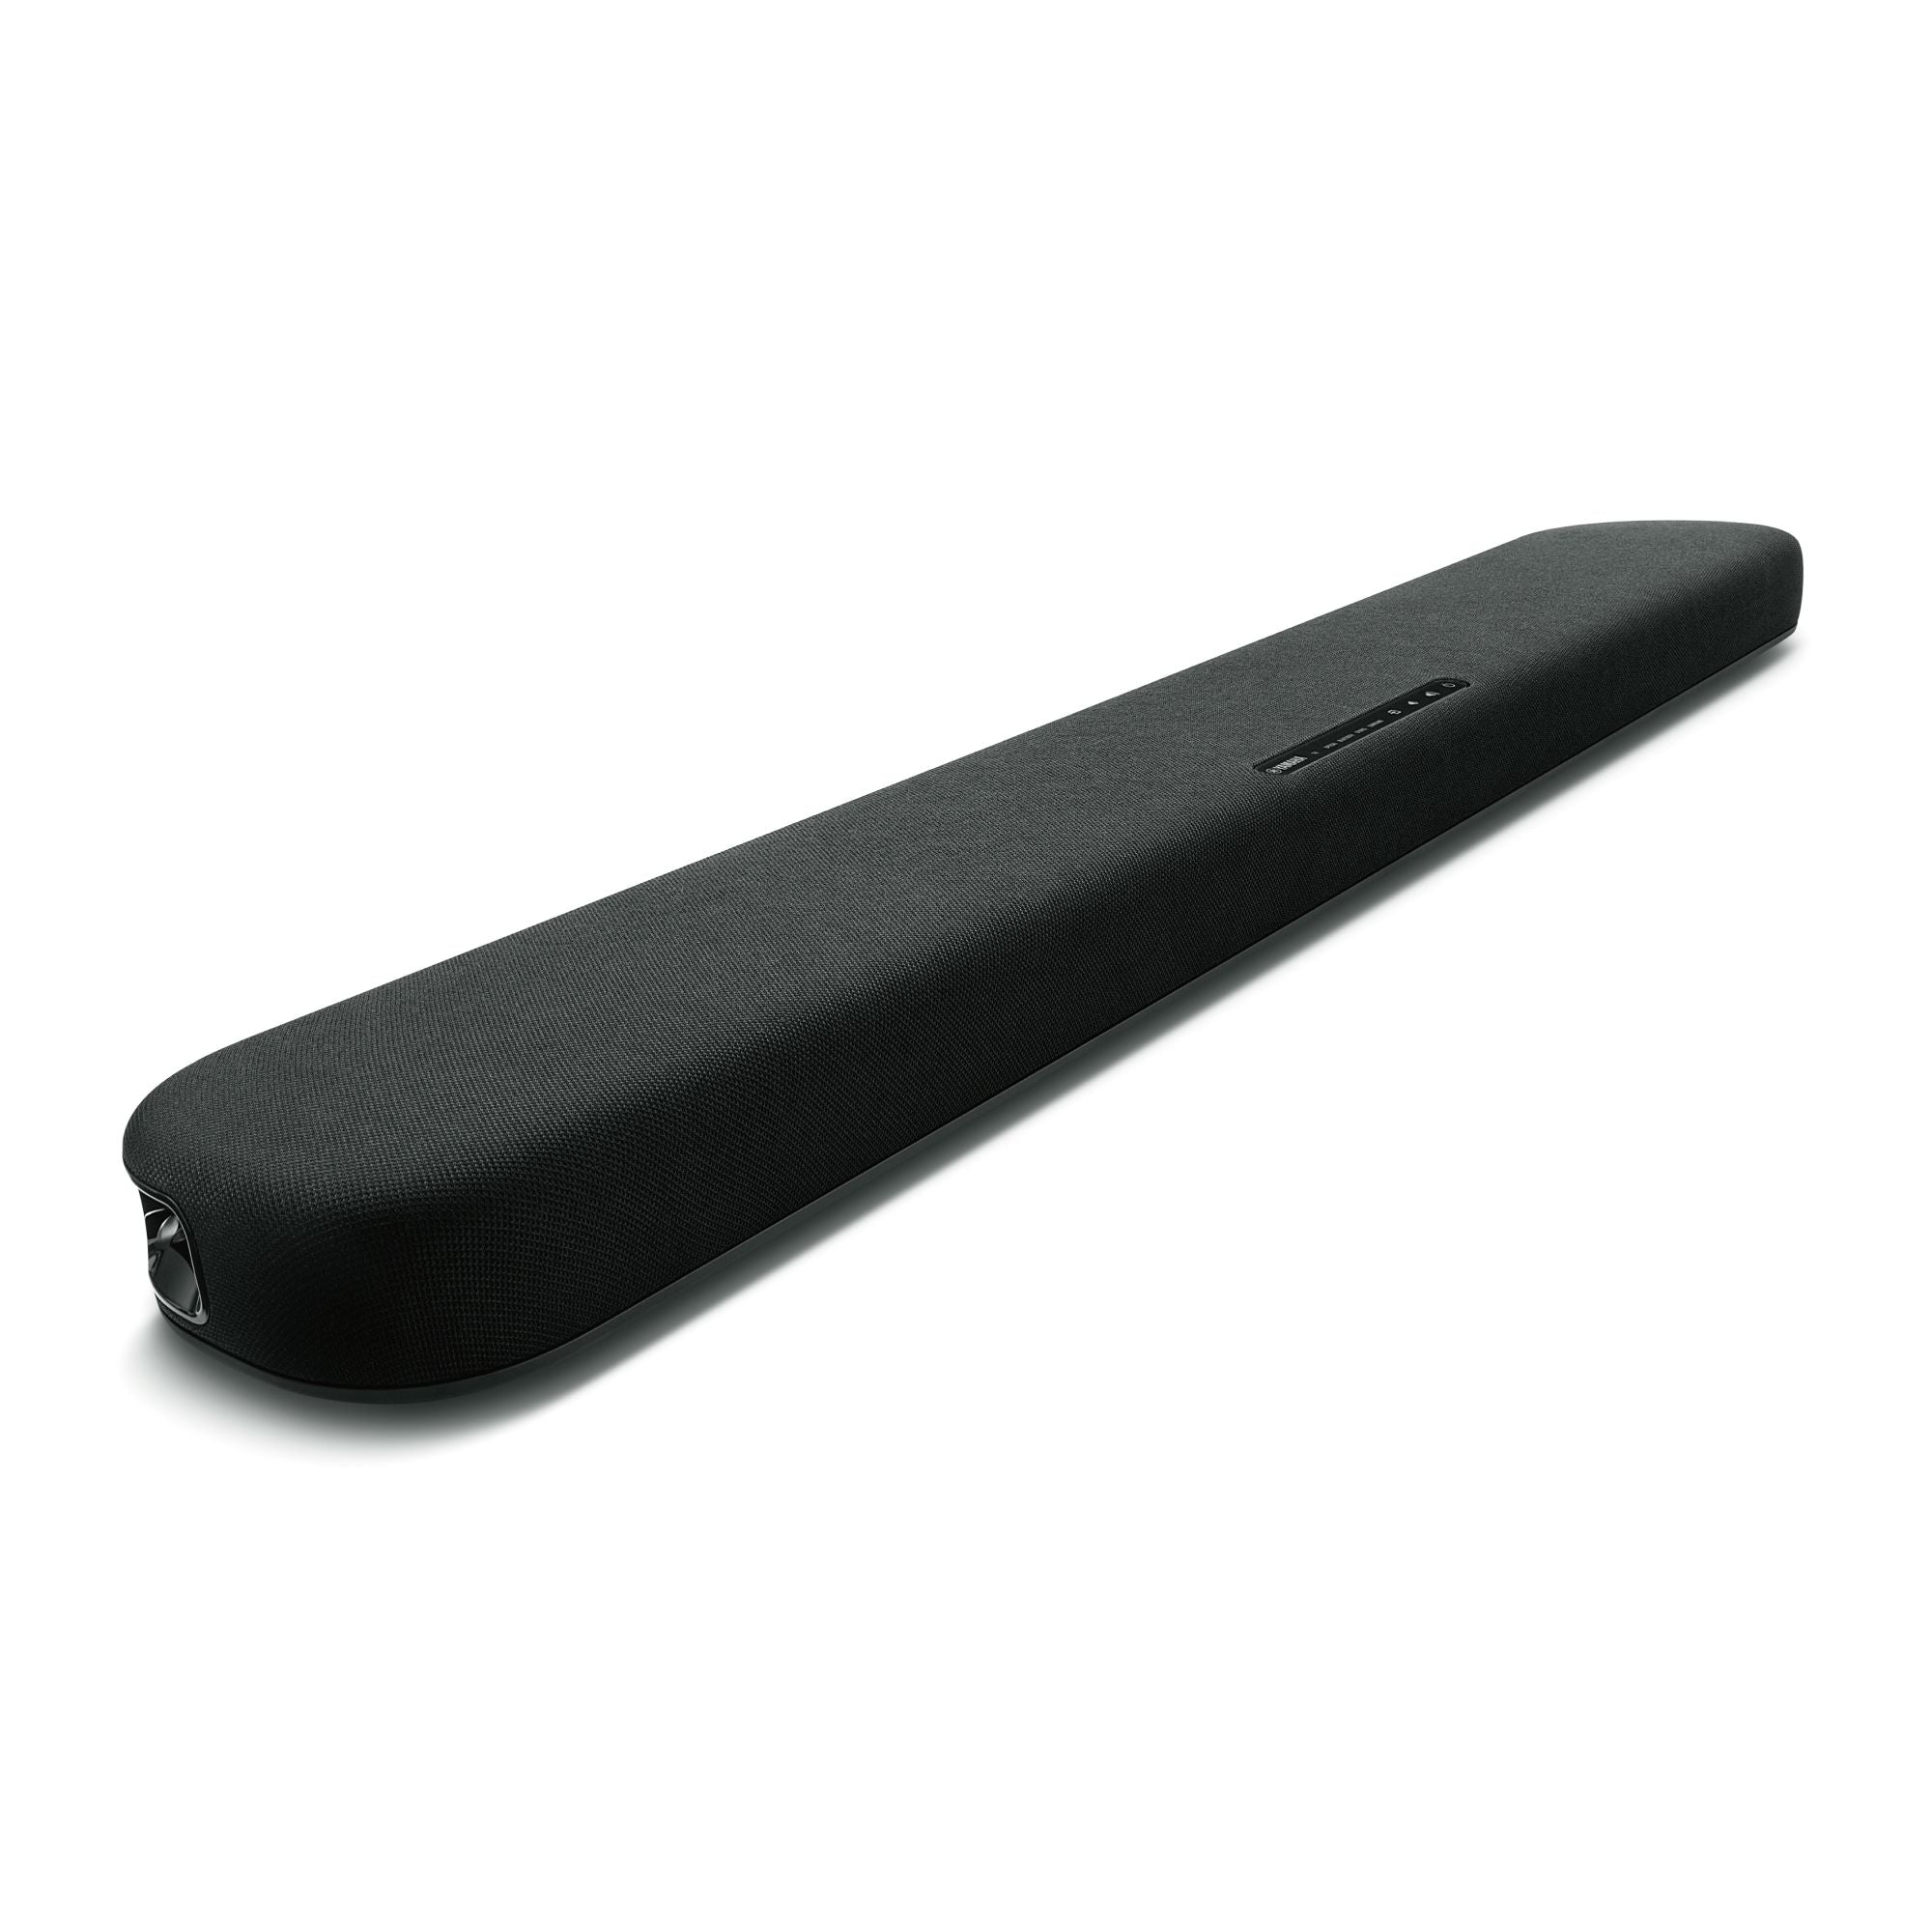 Yamaha SR-B20A Sound Bar with Built in Subwoofer